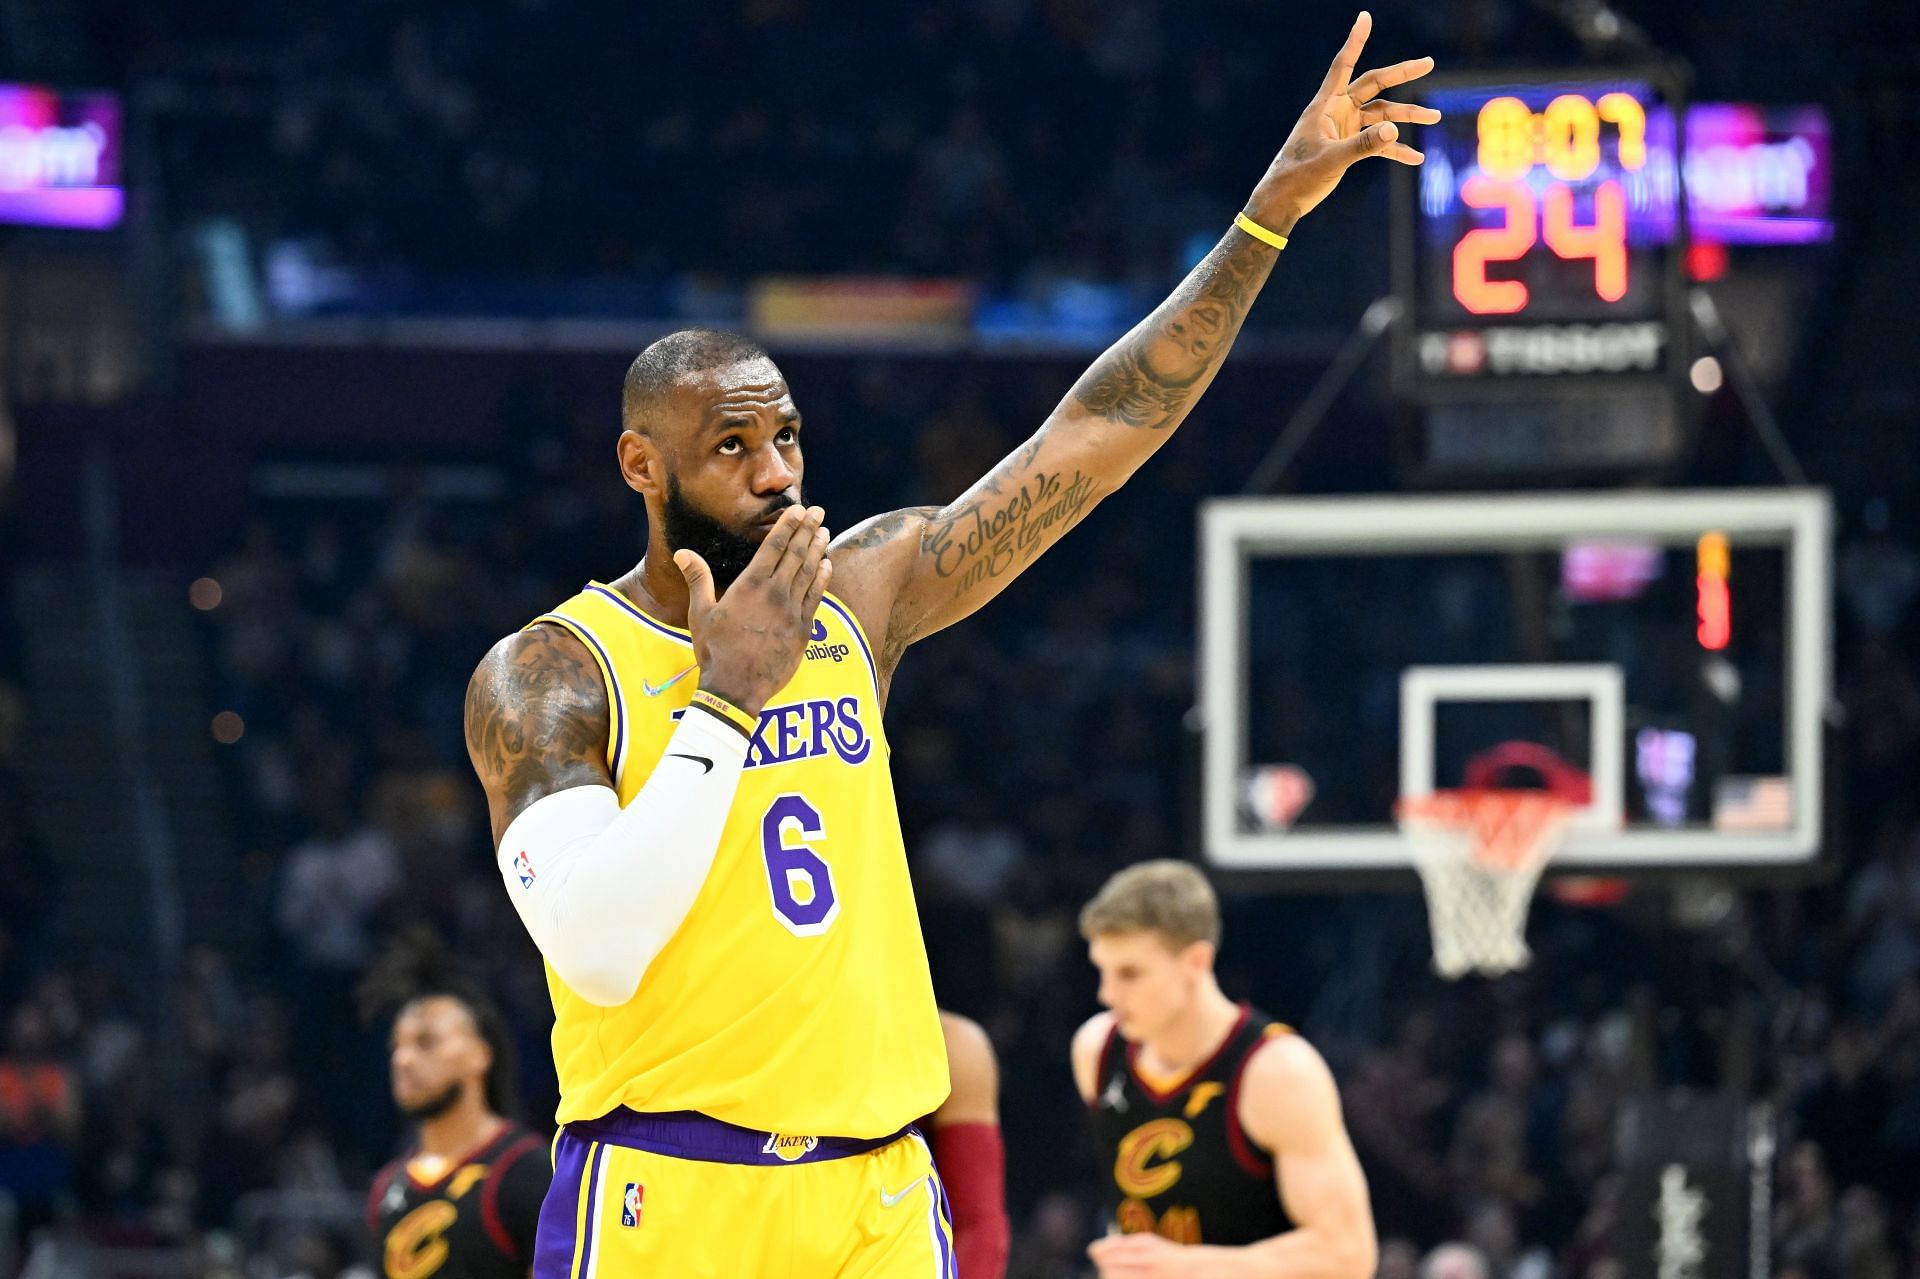 Lakers' LeBron James returns to Cleveland, gets standing ovation